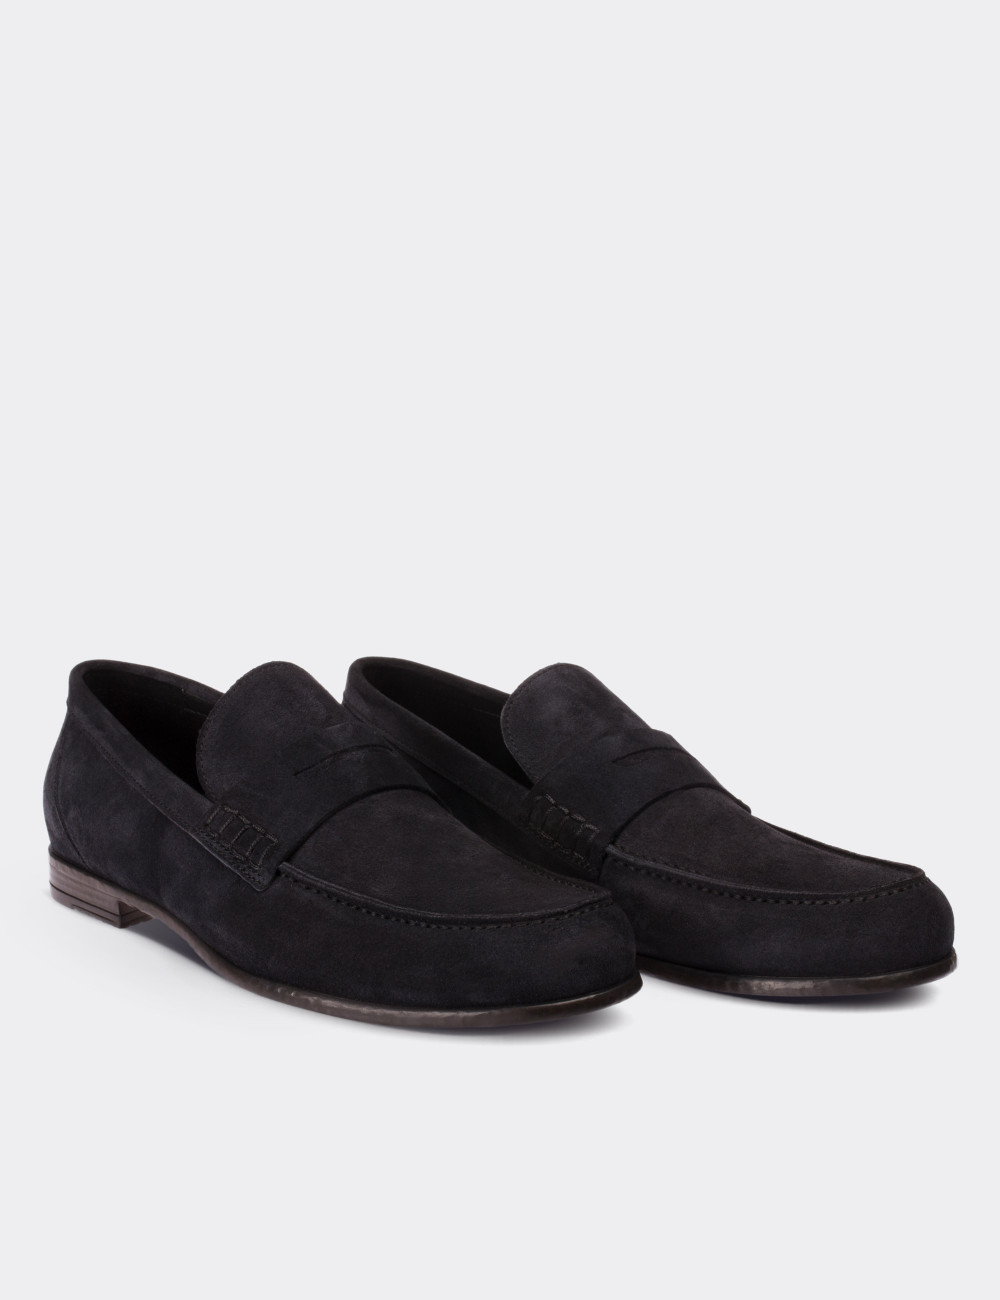 Navy Suede Leather Loafers - 01538MLCVC01